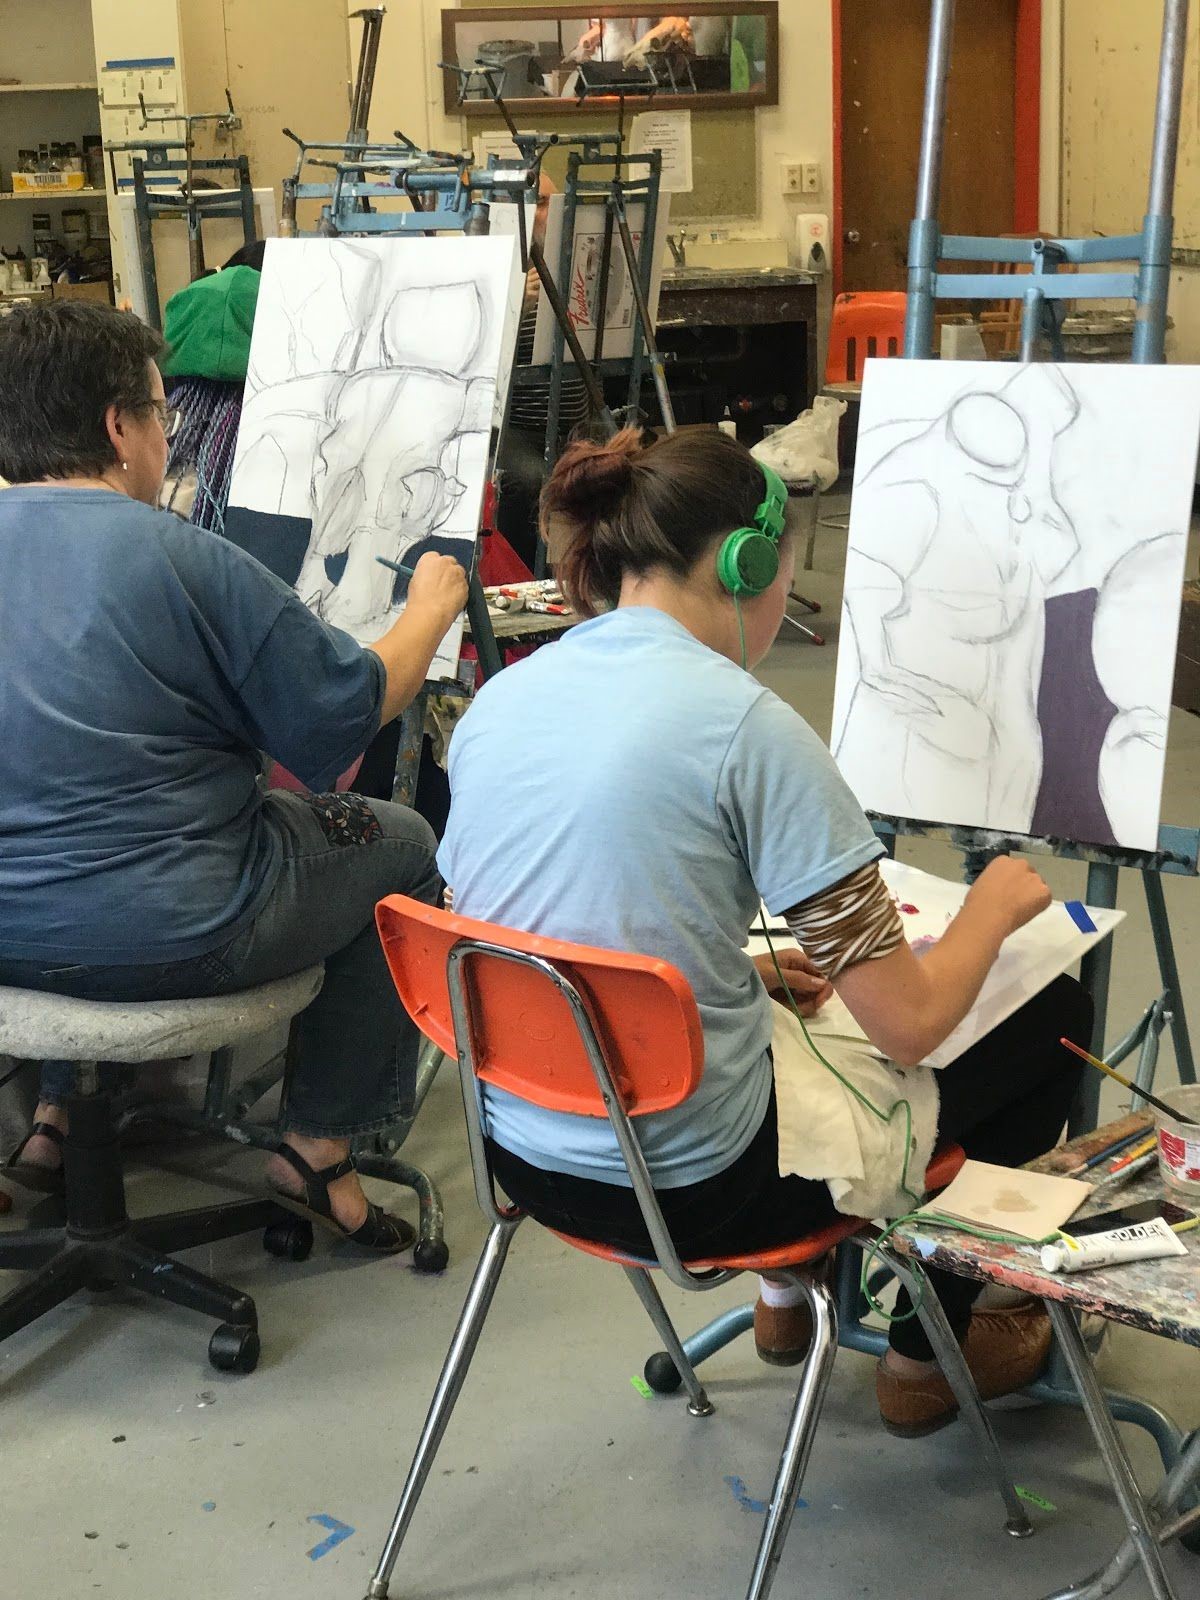 Students begin to paint their initial sketches. Photo taken on Sep. ?, 2017 by Jasmine 